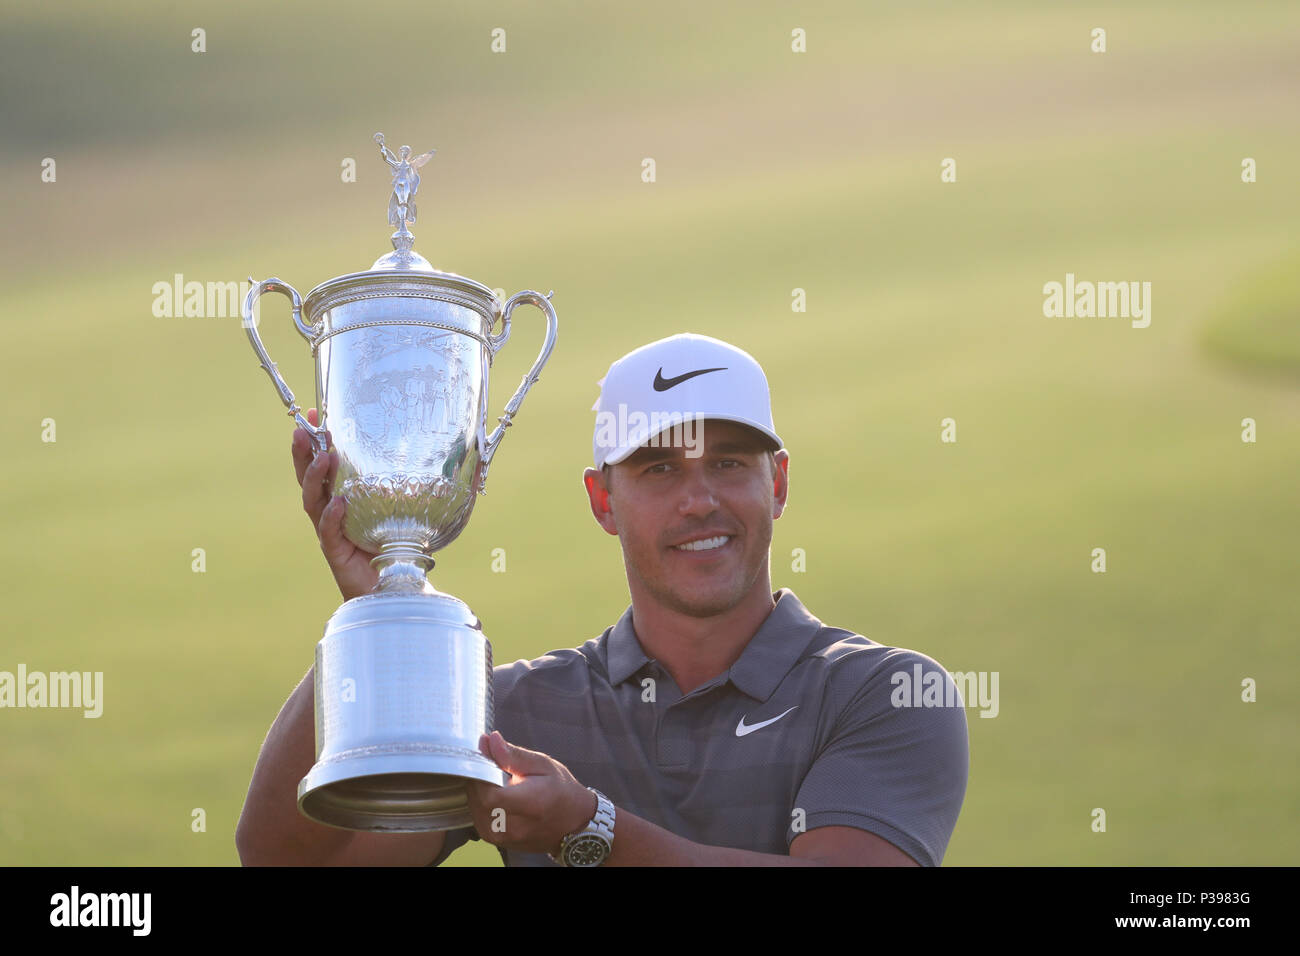 Brooks Koepka of USA celebrates with the trophy after winning the final round of the 118th U.S. Open Championship at the Shinnecock Hills Golf Club in Southampton, New York, United States, on June 16, 2018. (Photo by Koji Aoki/AFLO SPORT) Stock Photo